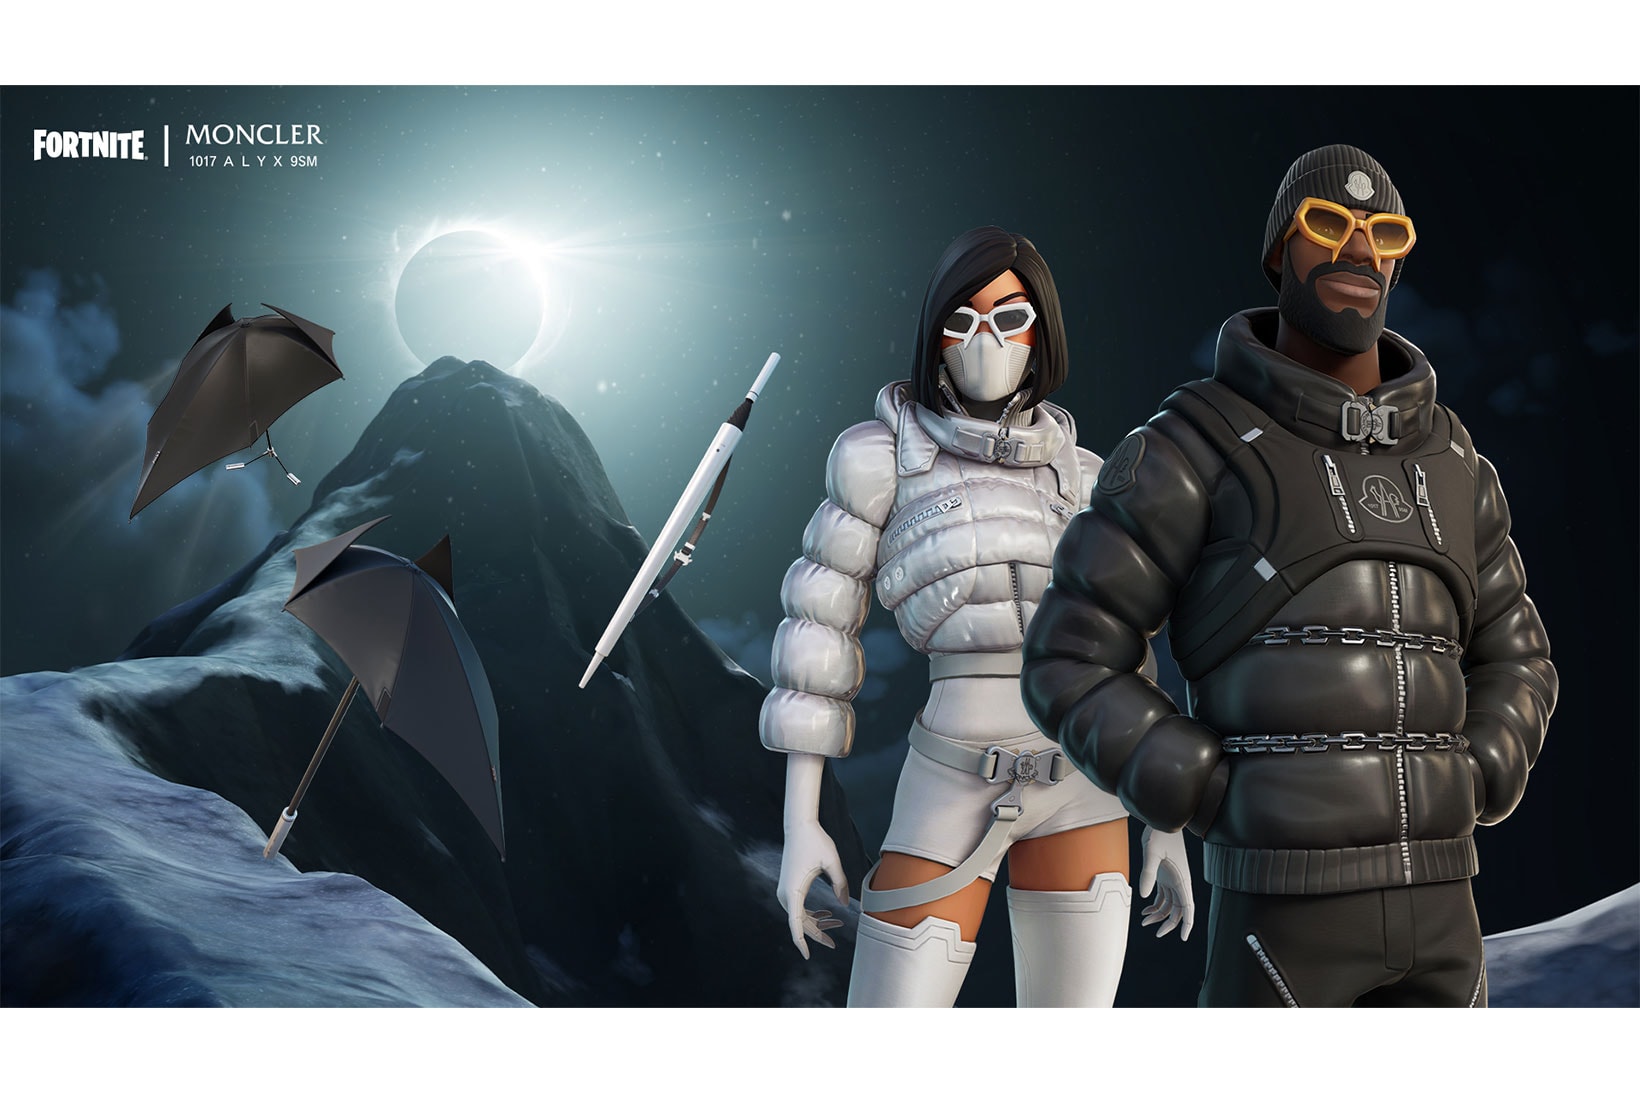 Fortnite 6 MONCLER 1017 ALYX 9SM Collaboration Jackets Puffer